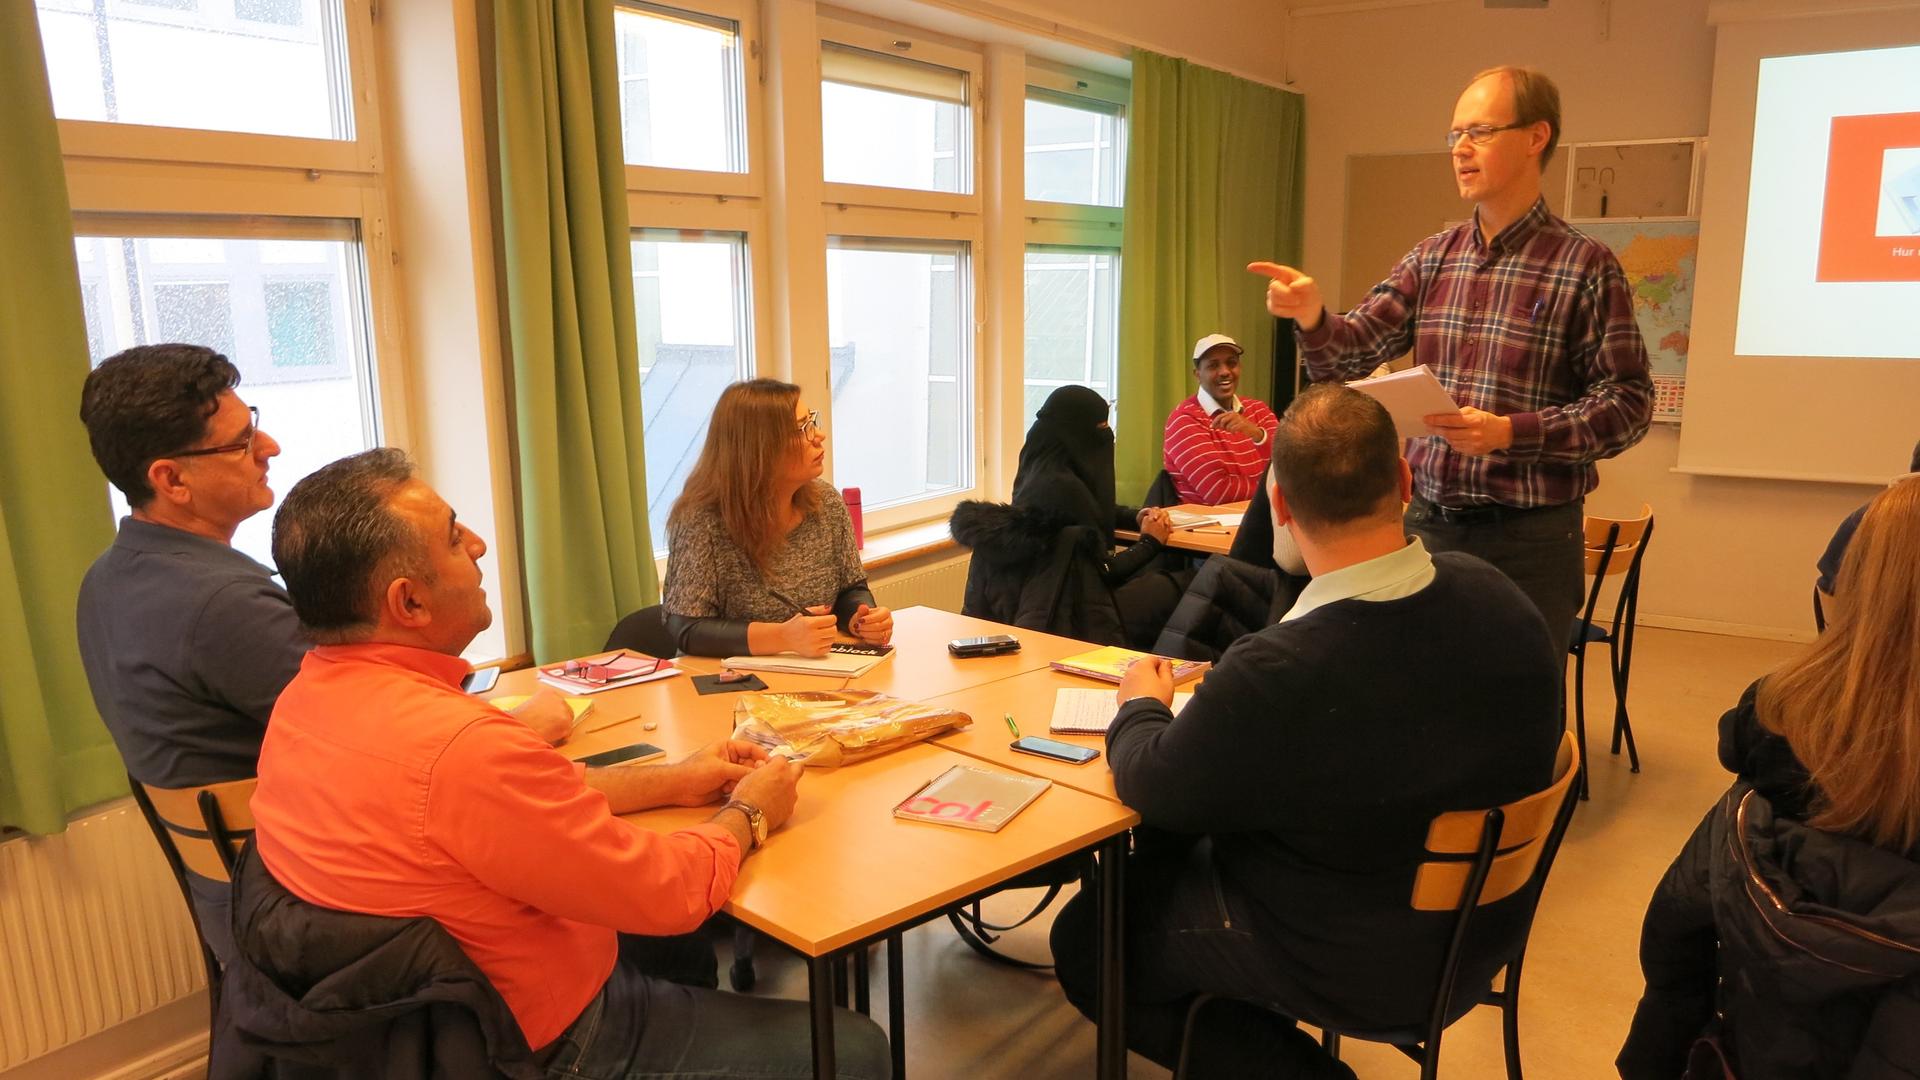 Arne Fredriksson instructs students from the Middle East and Africa in Swedish language, SFI-Södertälje. 